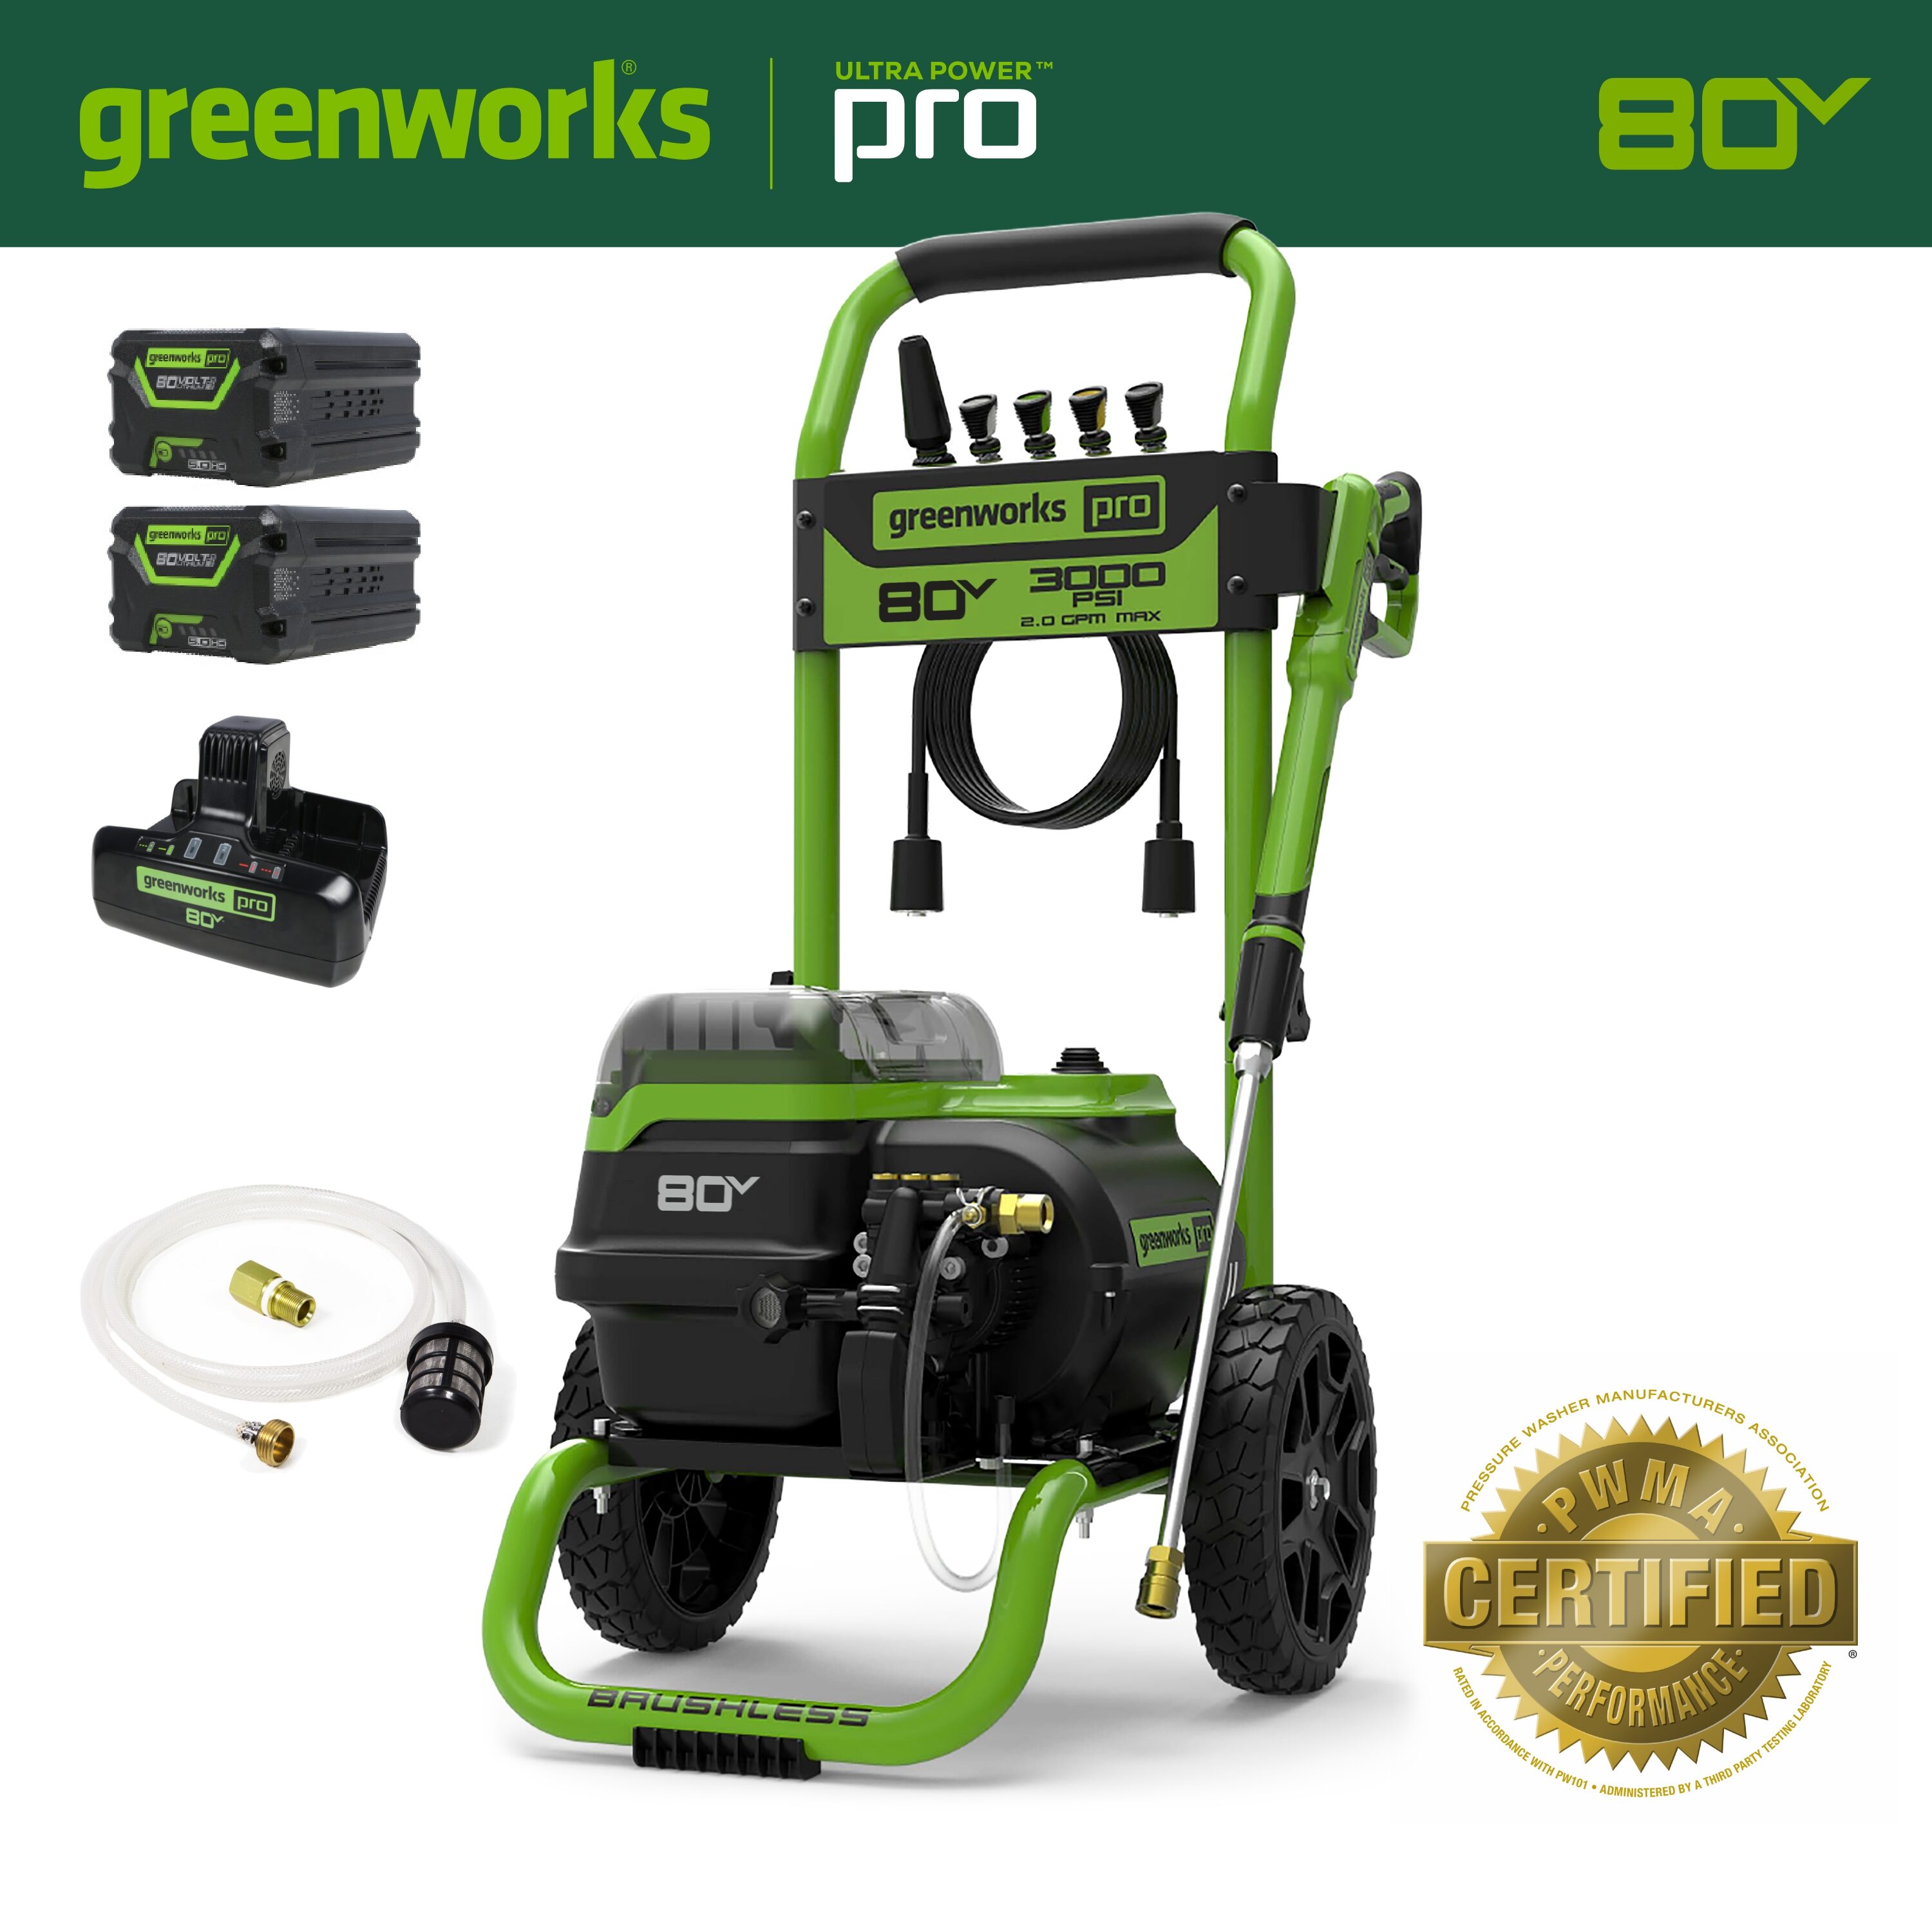 Greenworks - 1900 PSI 1.2 GPM Electric Pressure Washer Combo Kit - Green